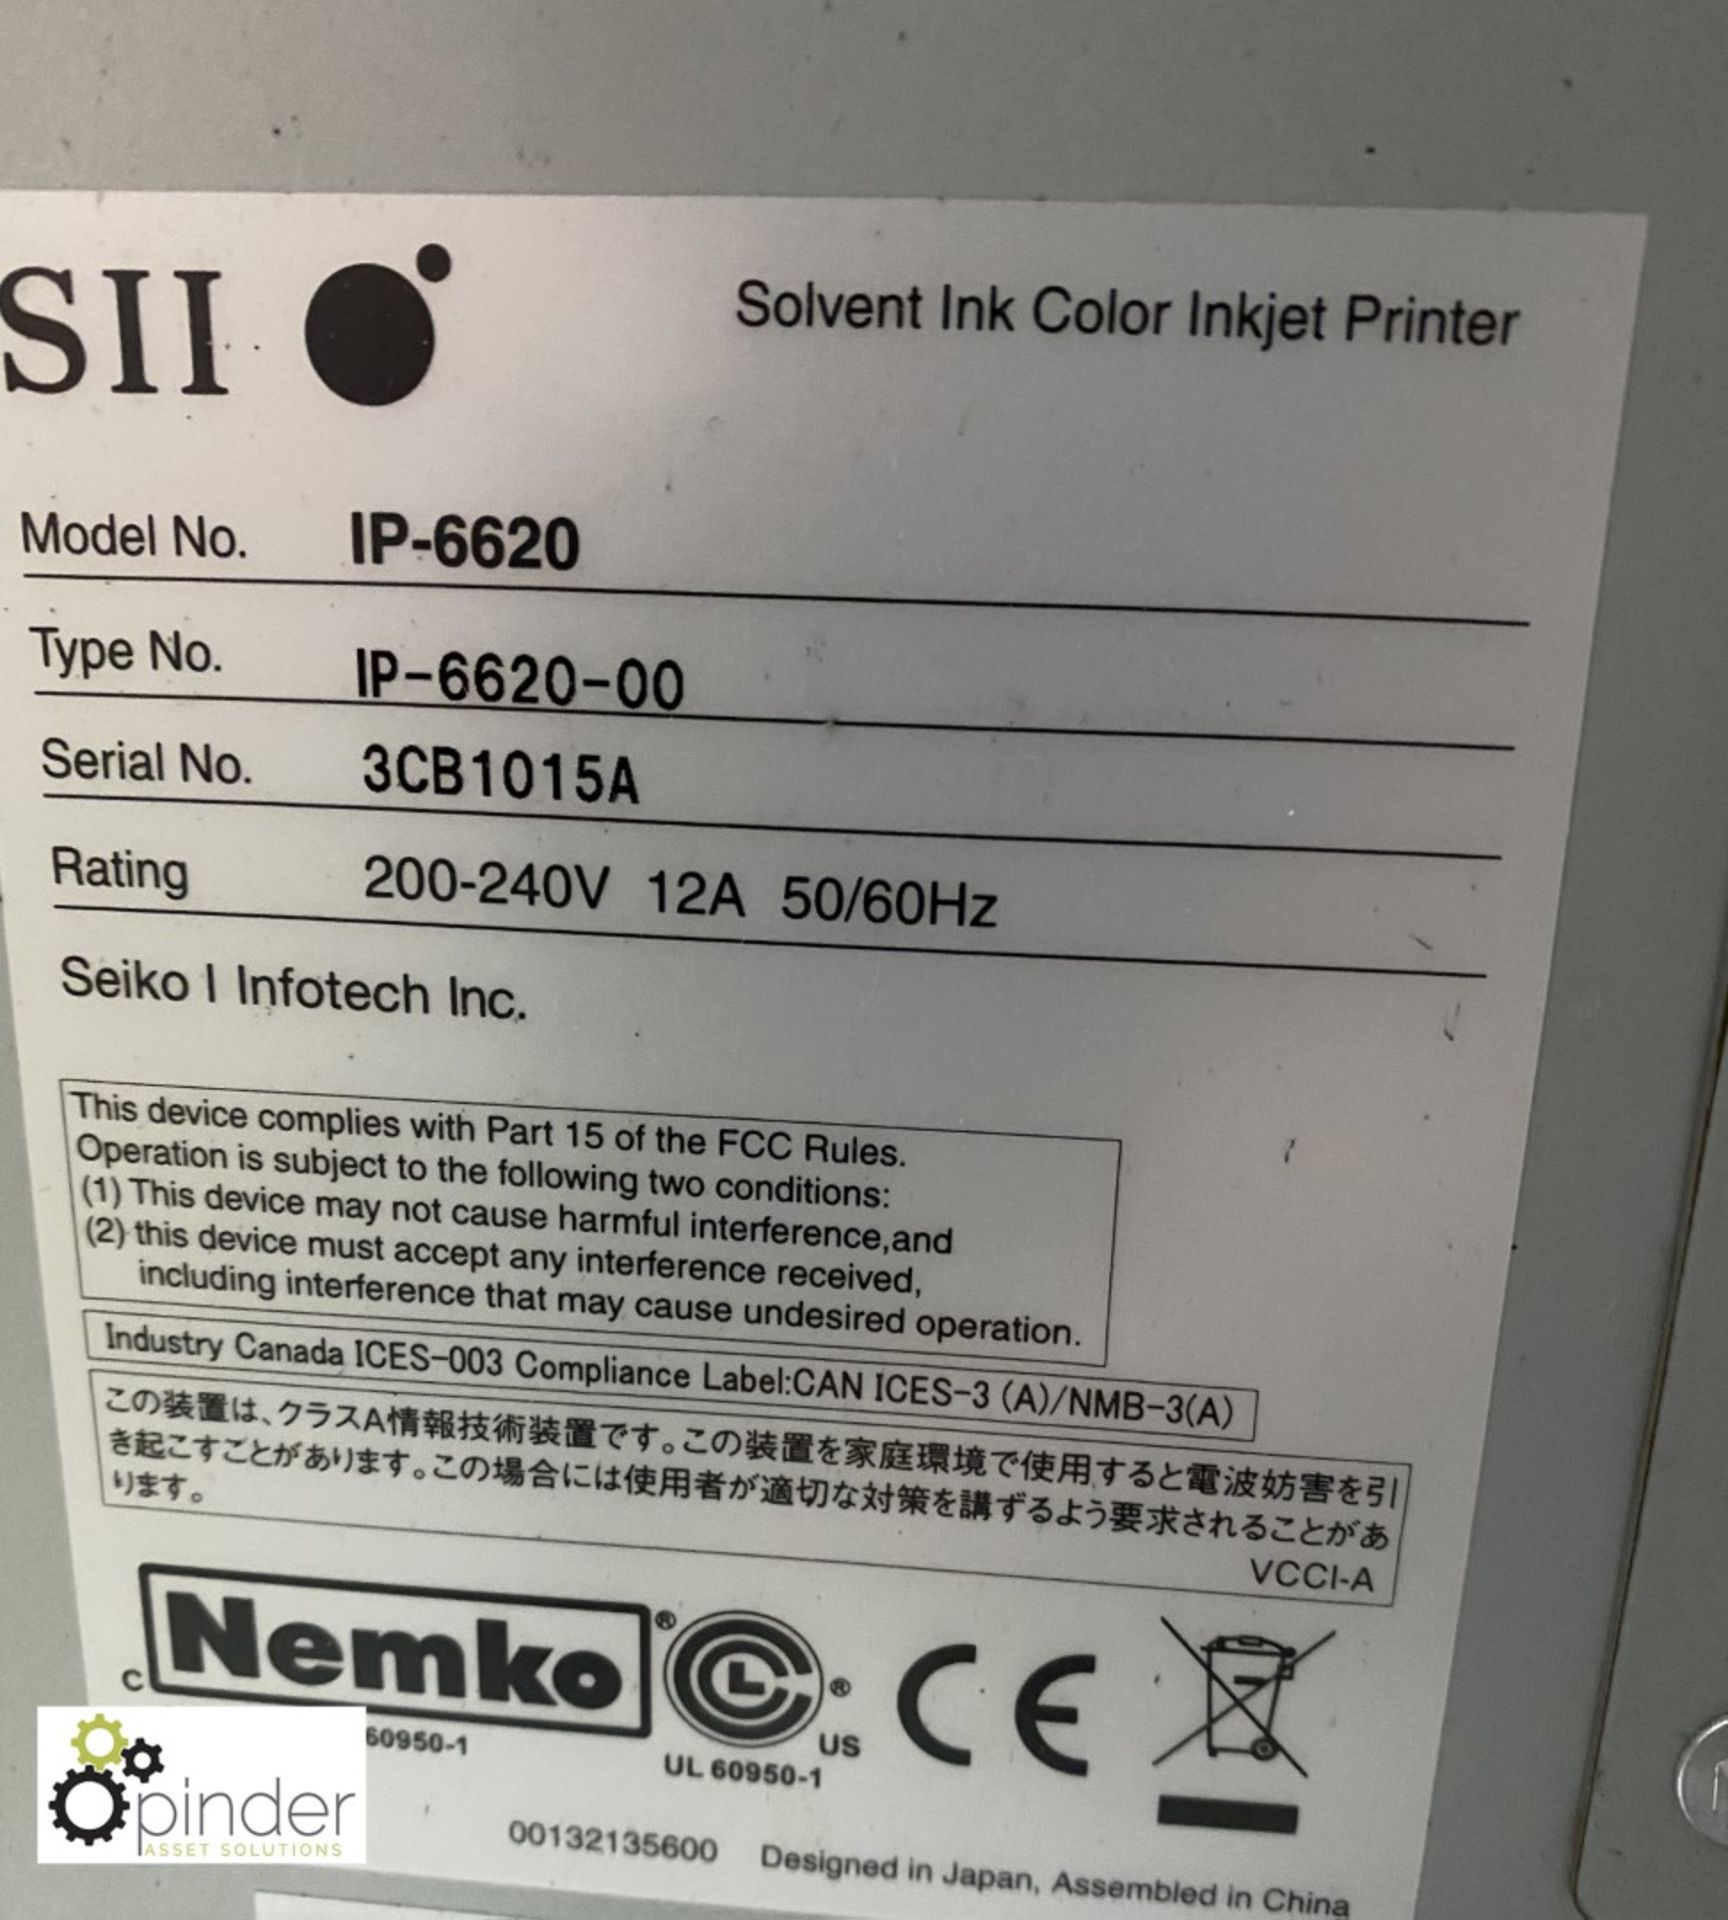 Seiko Infotech Color Painter M-64S IP-6620 Wide Format Solvent Ink Colour Inkjet Printer, 64in - Image 12 of 14